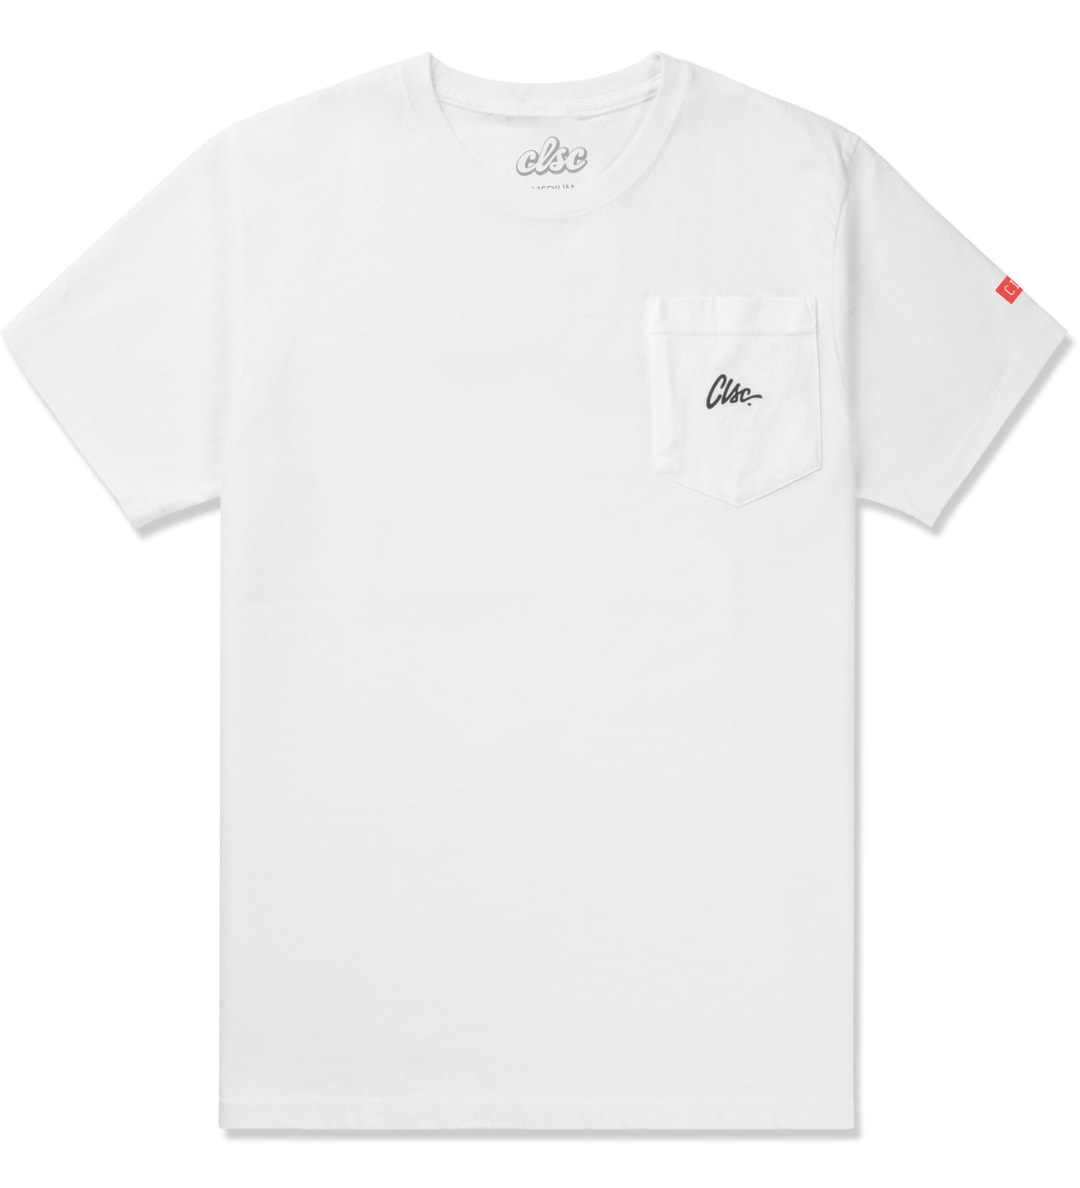 Clsc - White CLSC T-Shirt | HBX - Globally Curated Fashion and ...